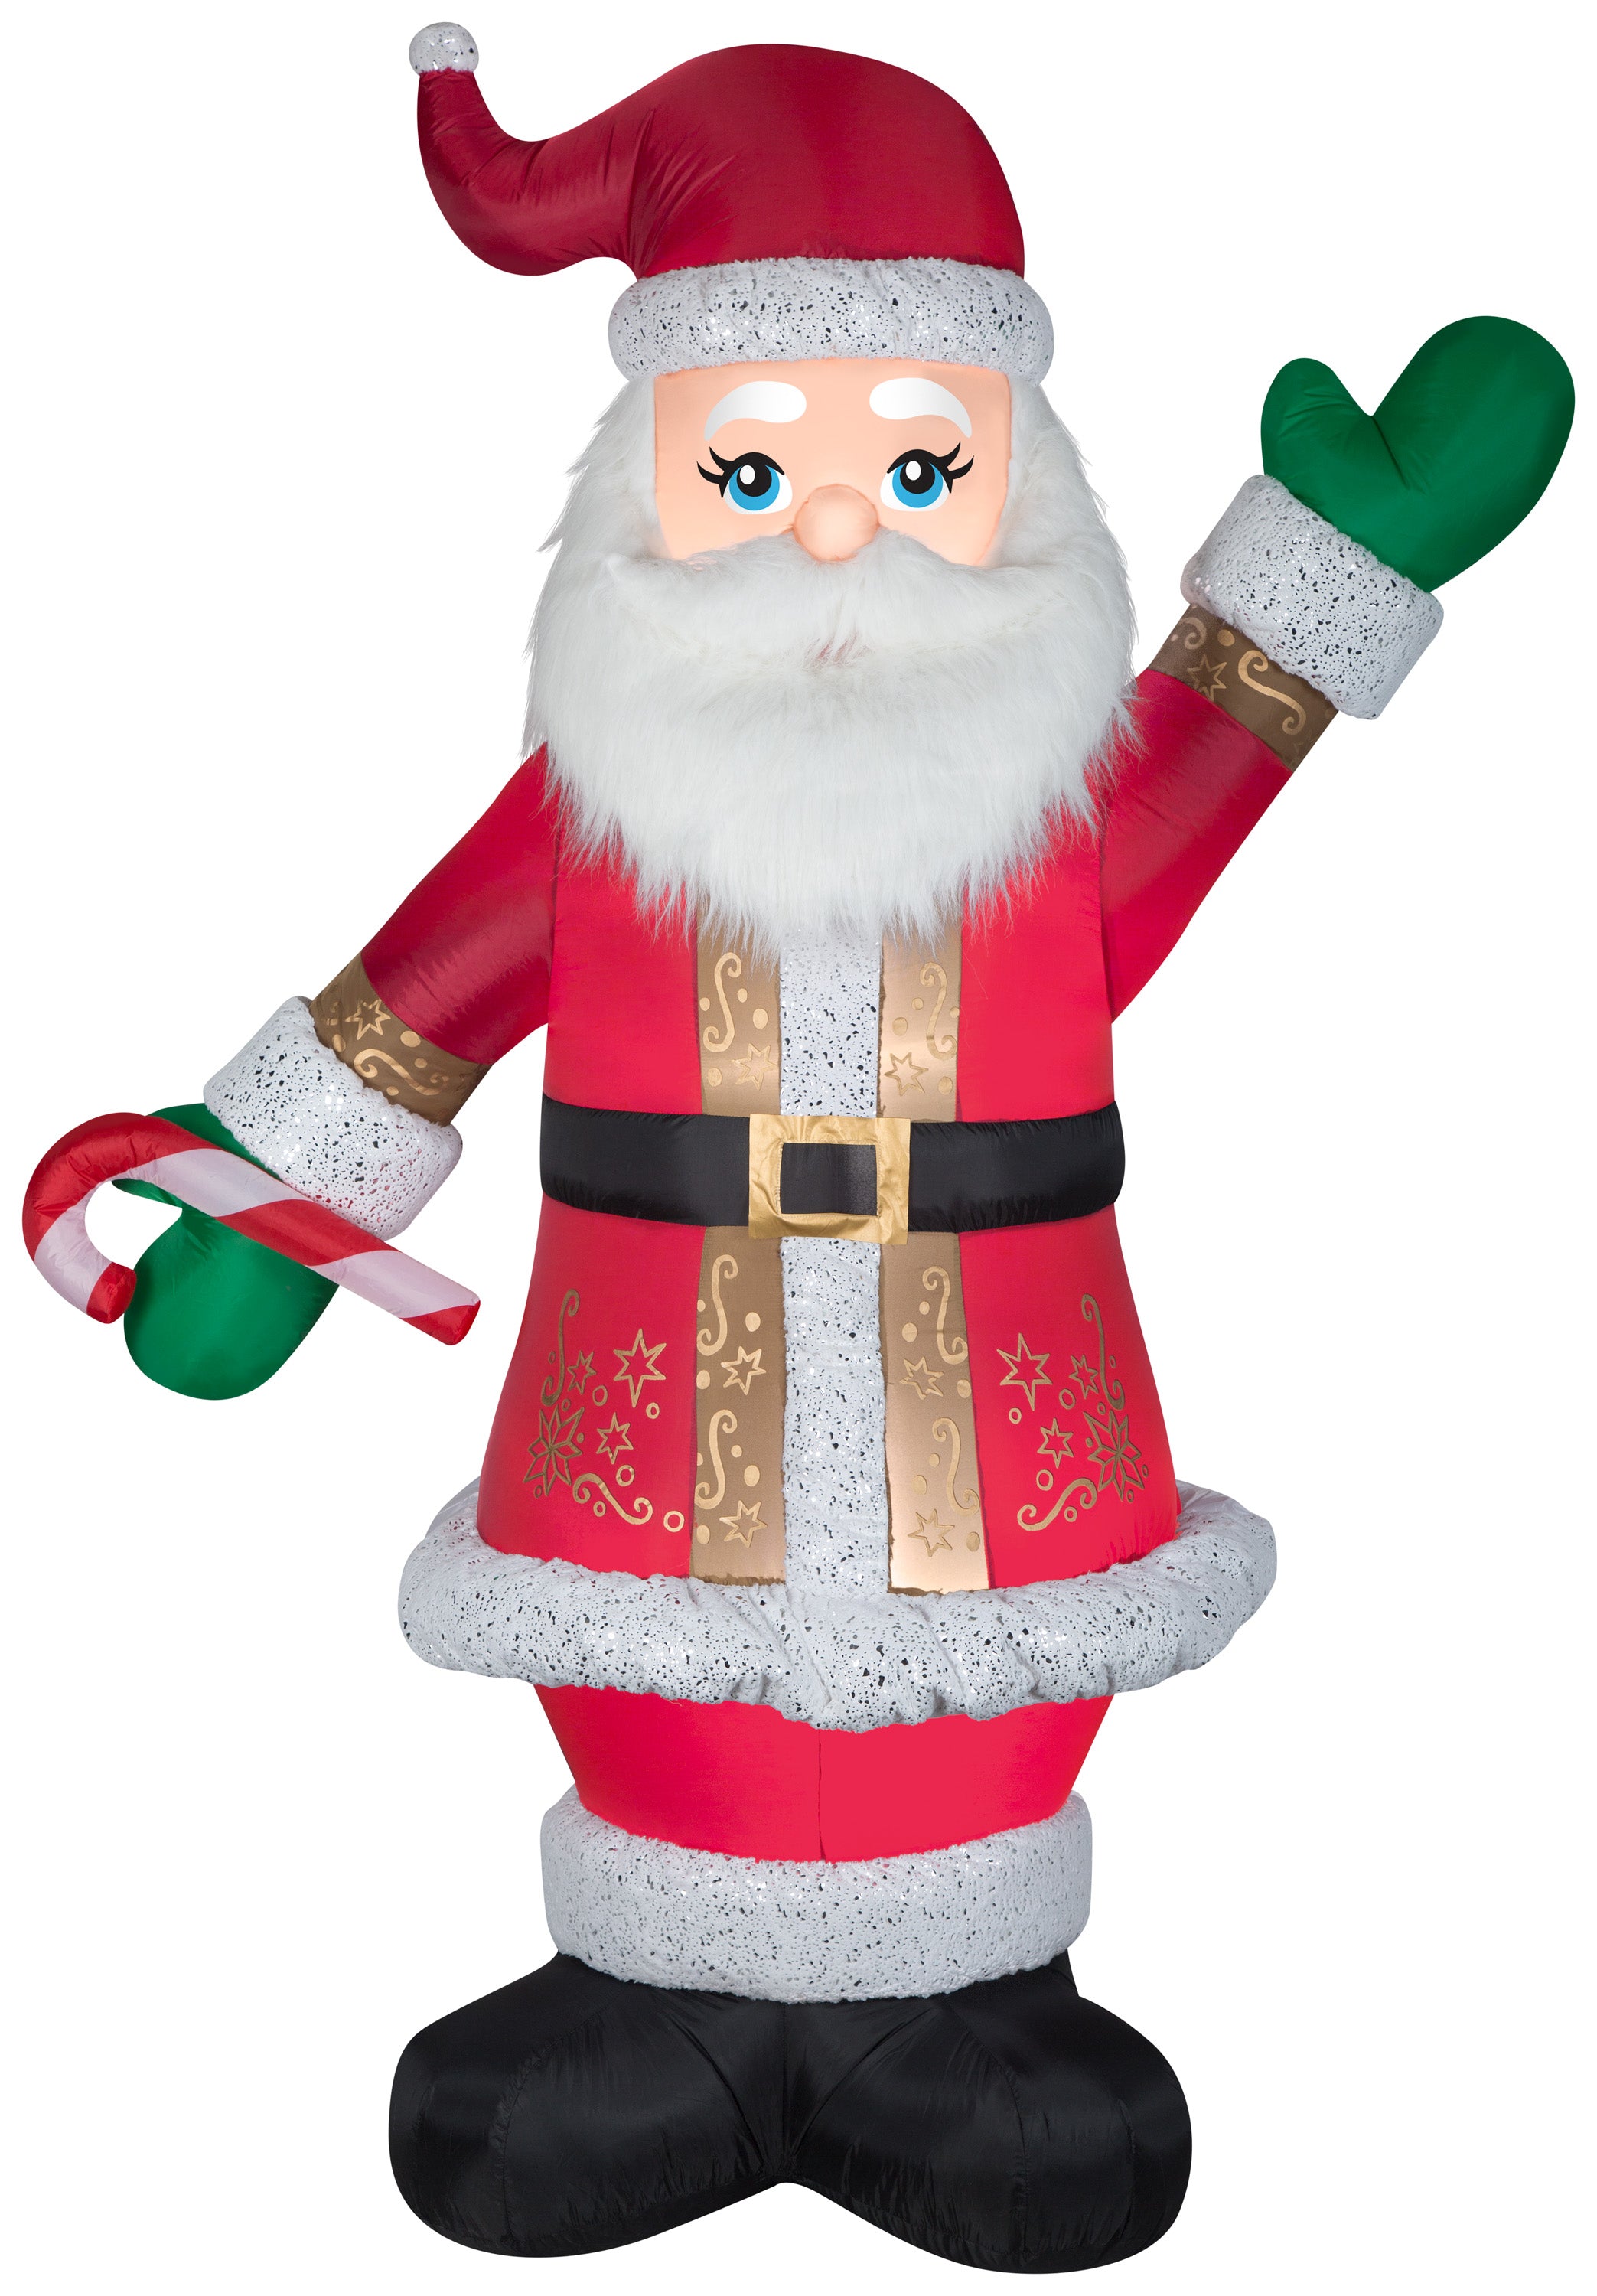 Gemmy Christmas Airblown Inflatable Mixed Media Luxe Santa w/Candy Cane, 8 ft Tall, Multicolored